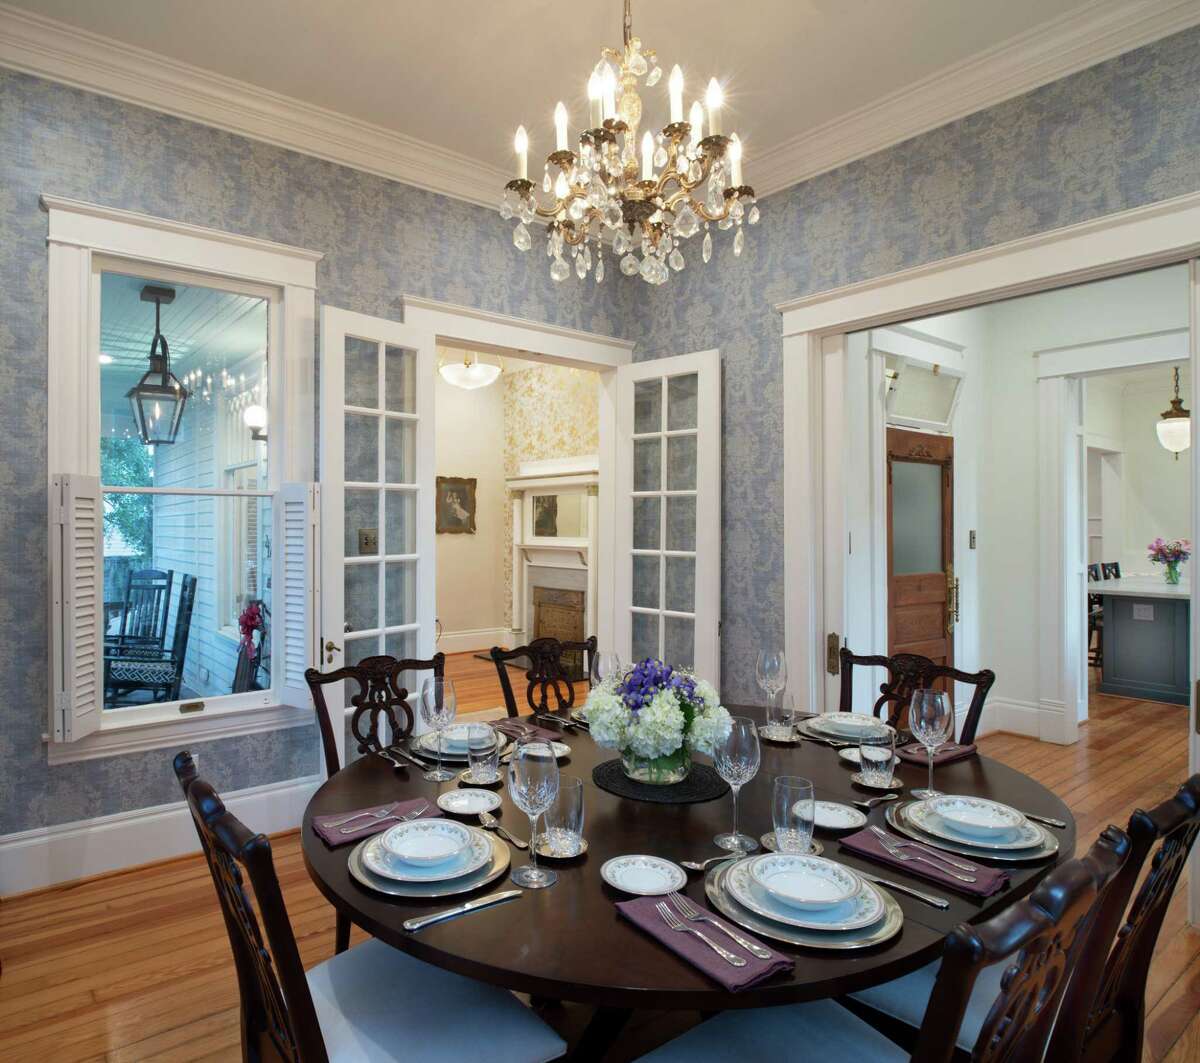 The dining room of the Heckendorns’ home looks out onto a big live oak tree and the street.